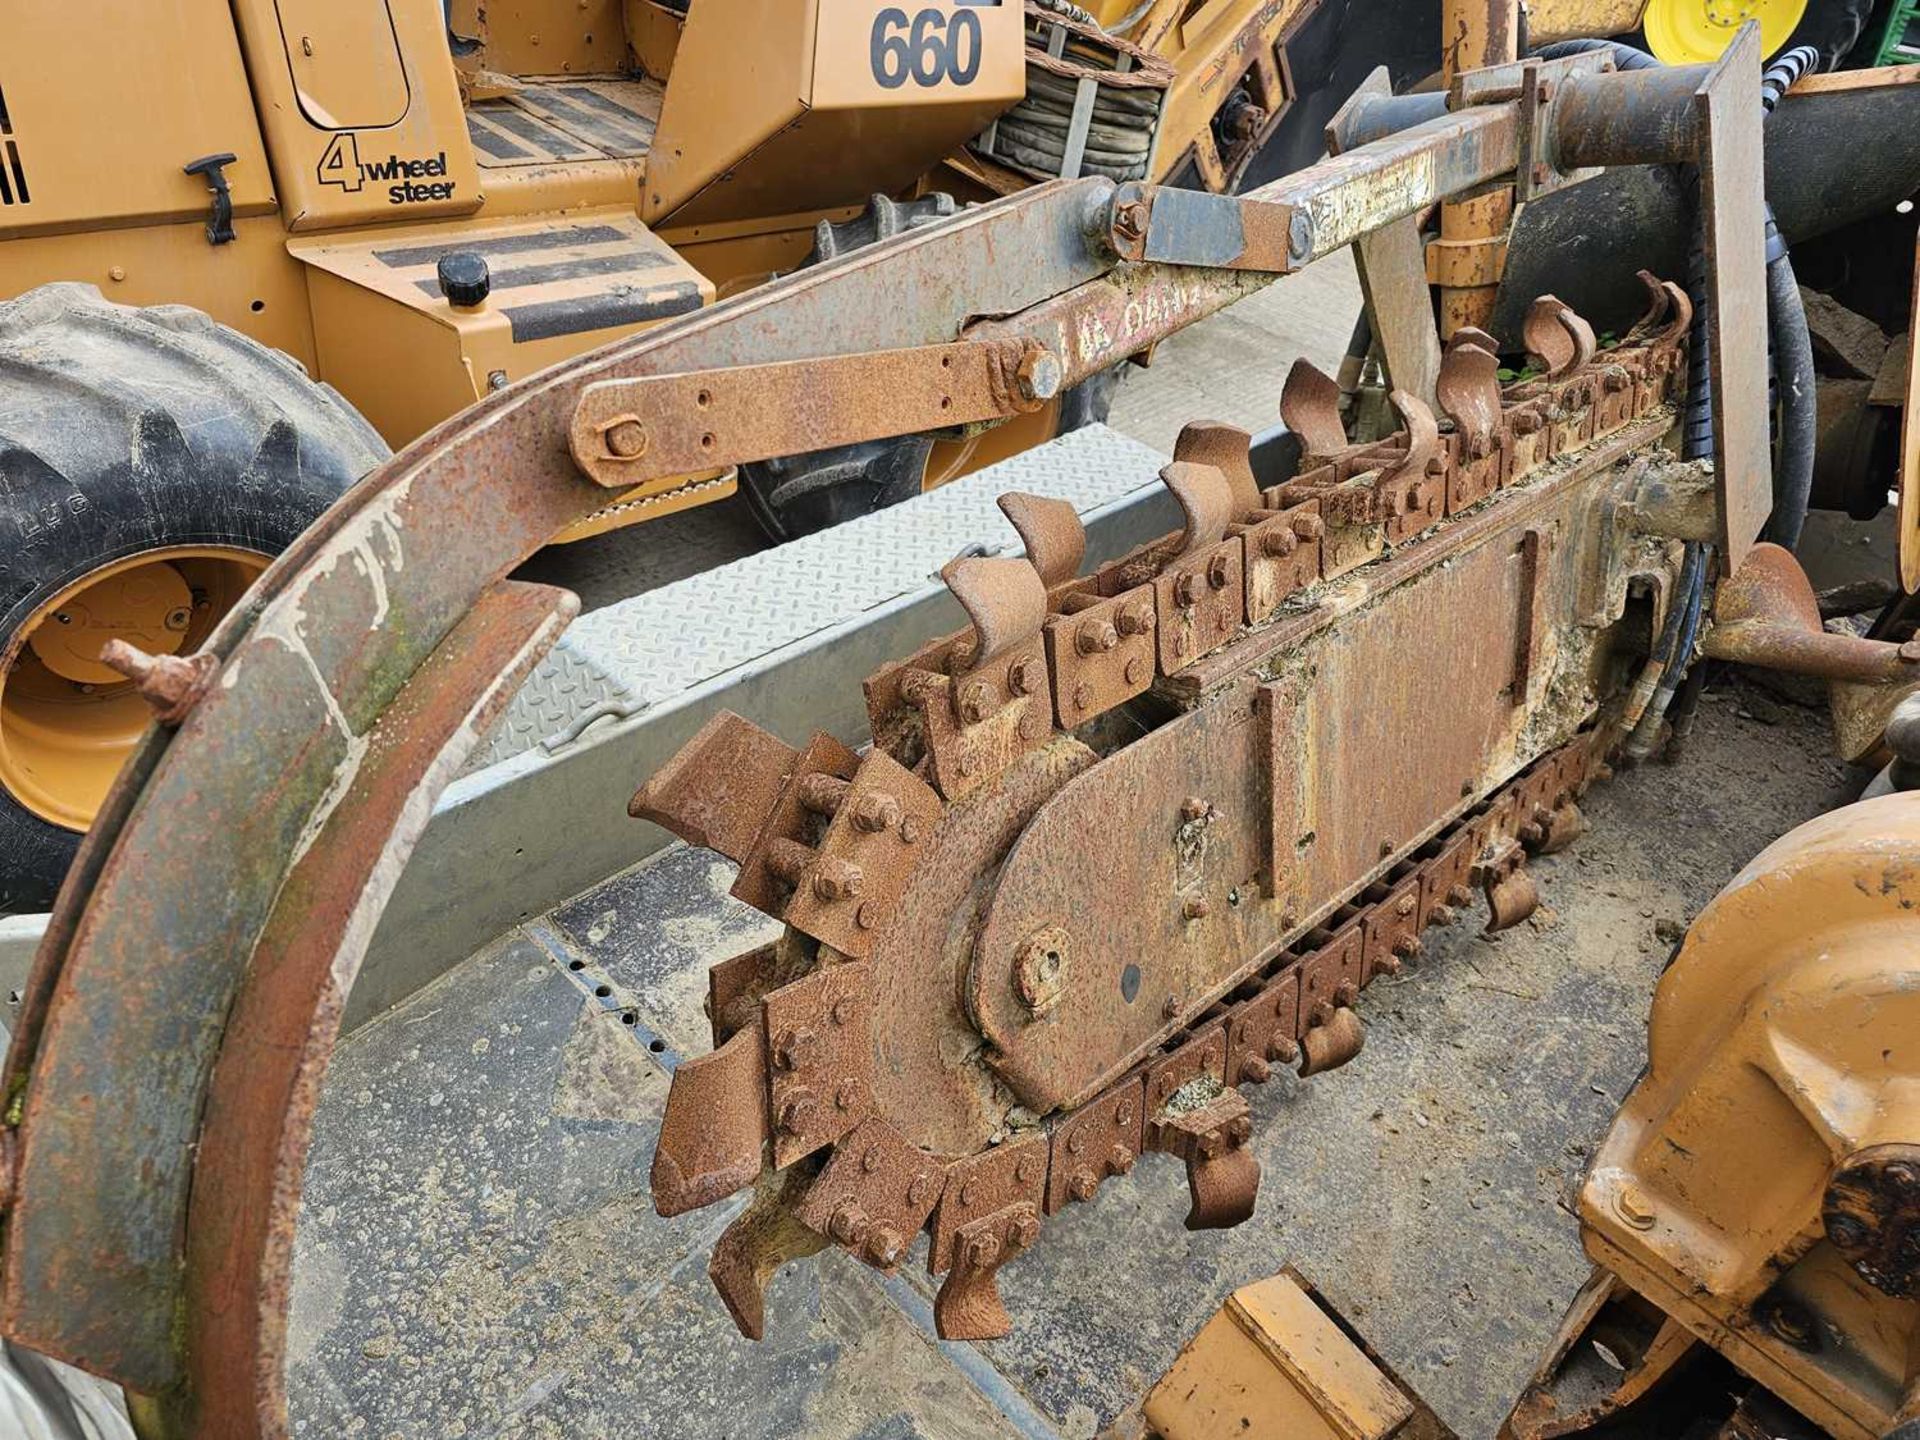 Case 660 4WD 4WS Trencher with TC450 Top Cutter, Chain Trencher, Mole Plough - Image 31 of 39